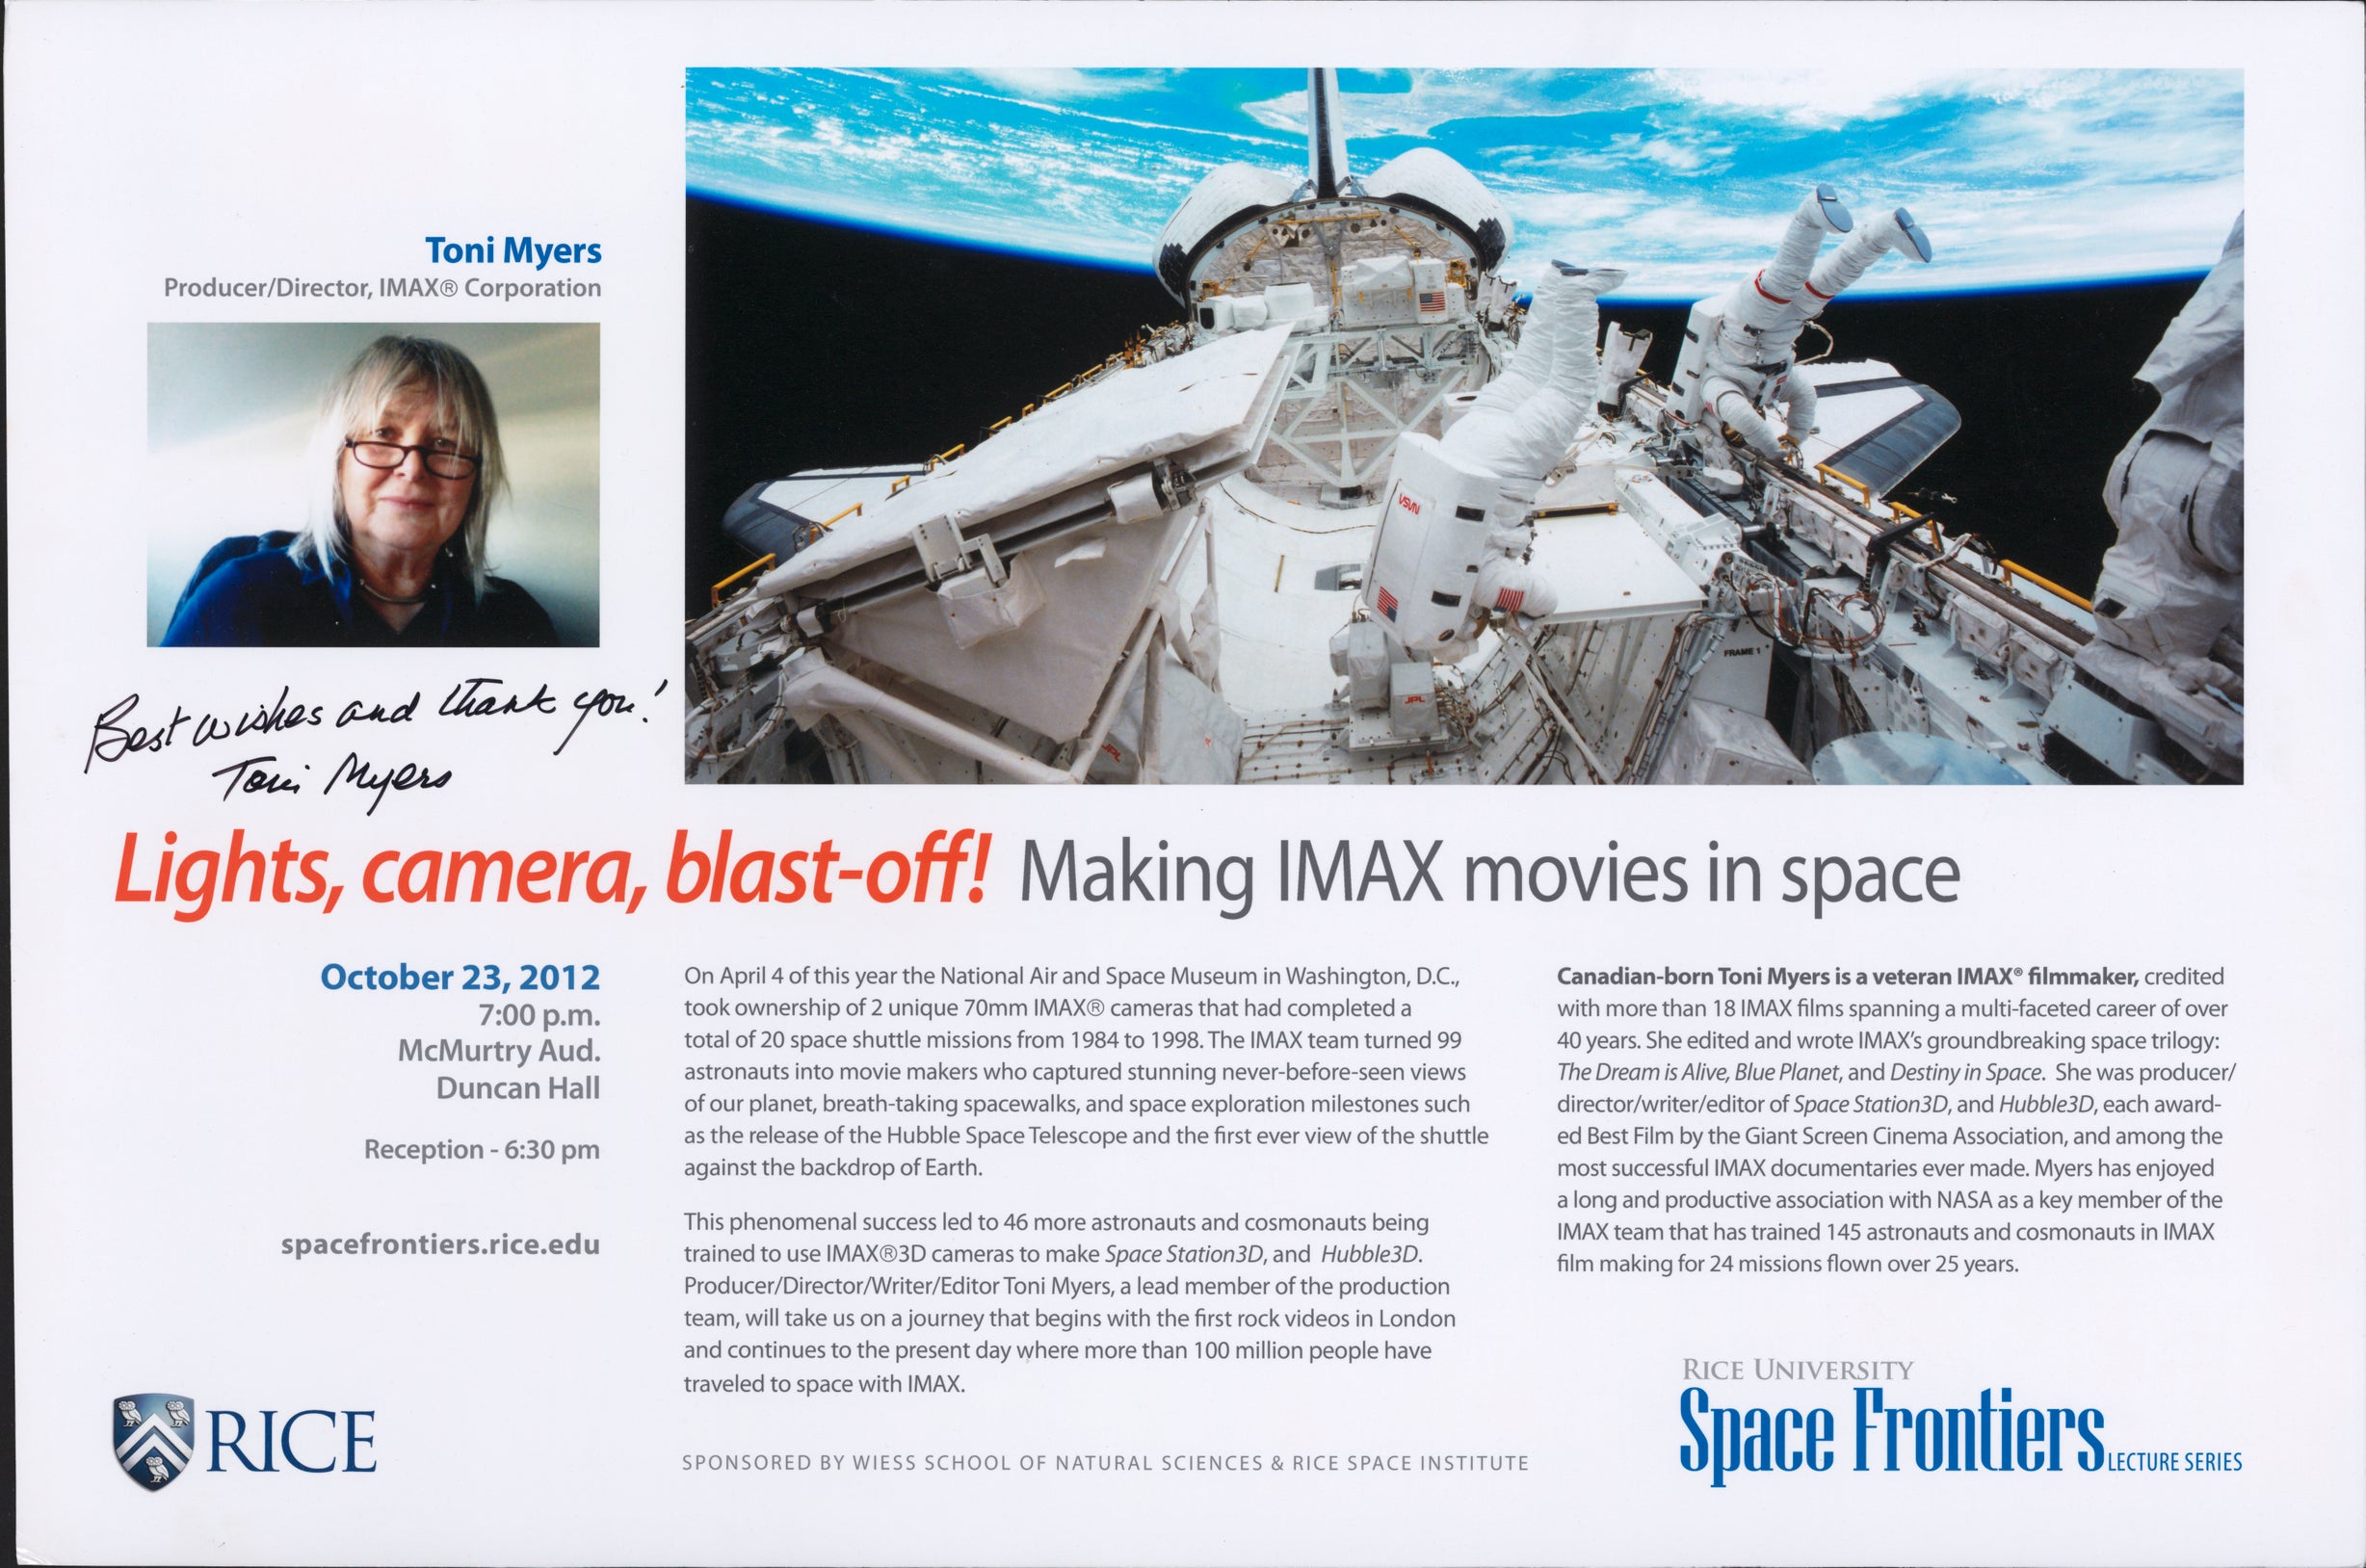 Poster of "Lights, camera, blast-off! Making IMAX movies in space" by Toni Myers